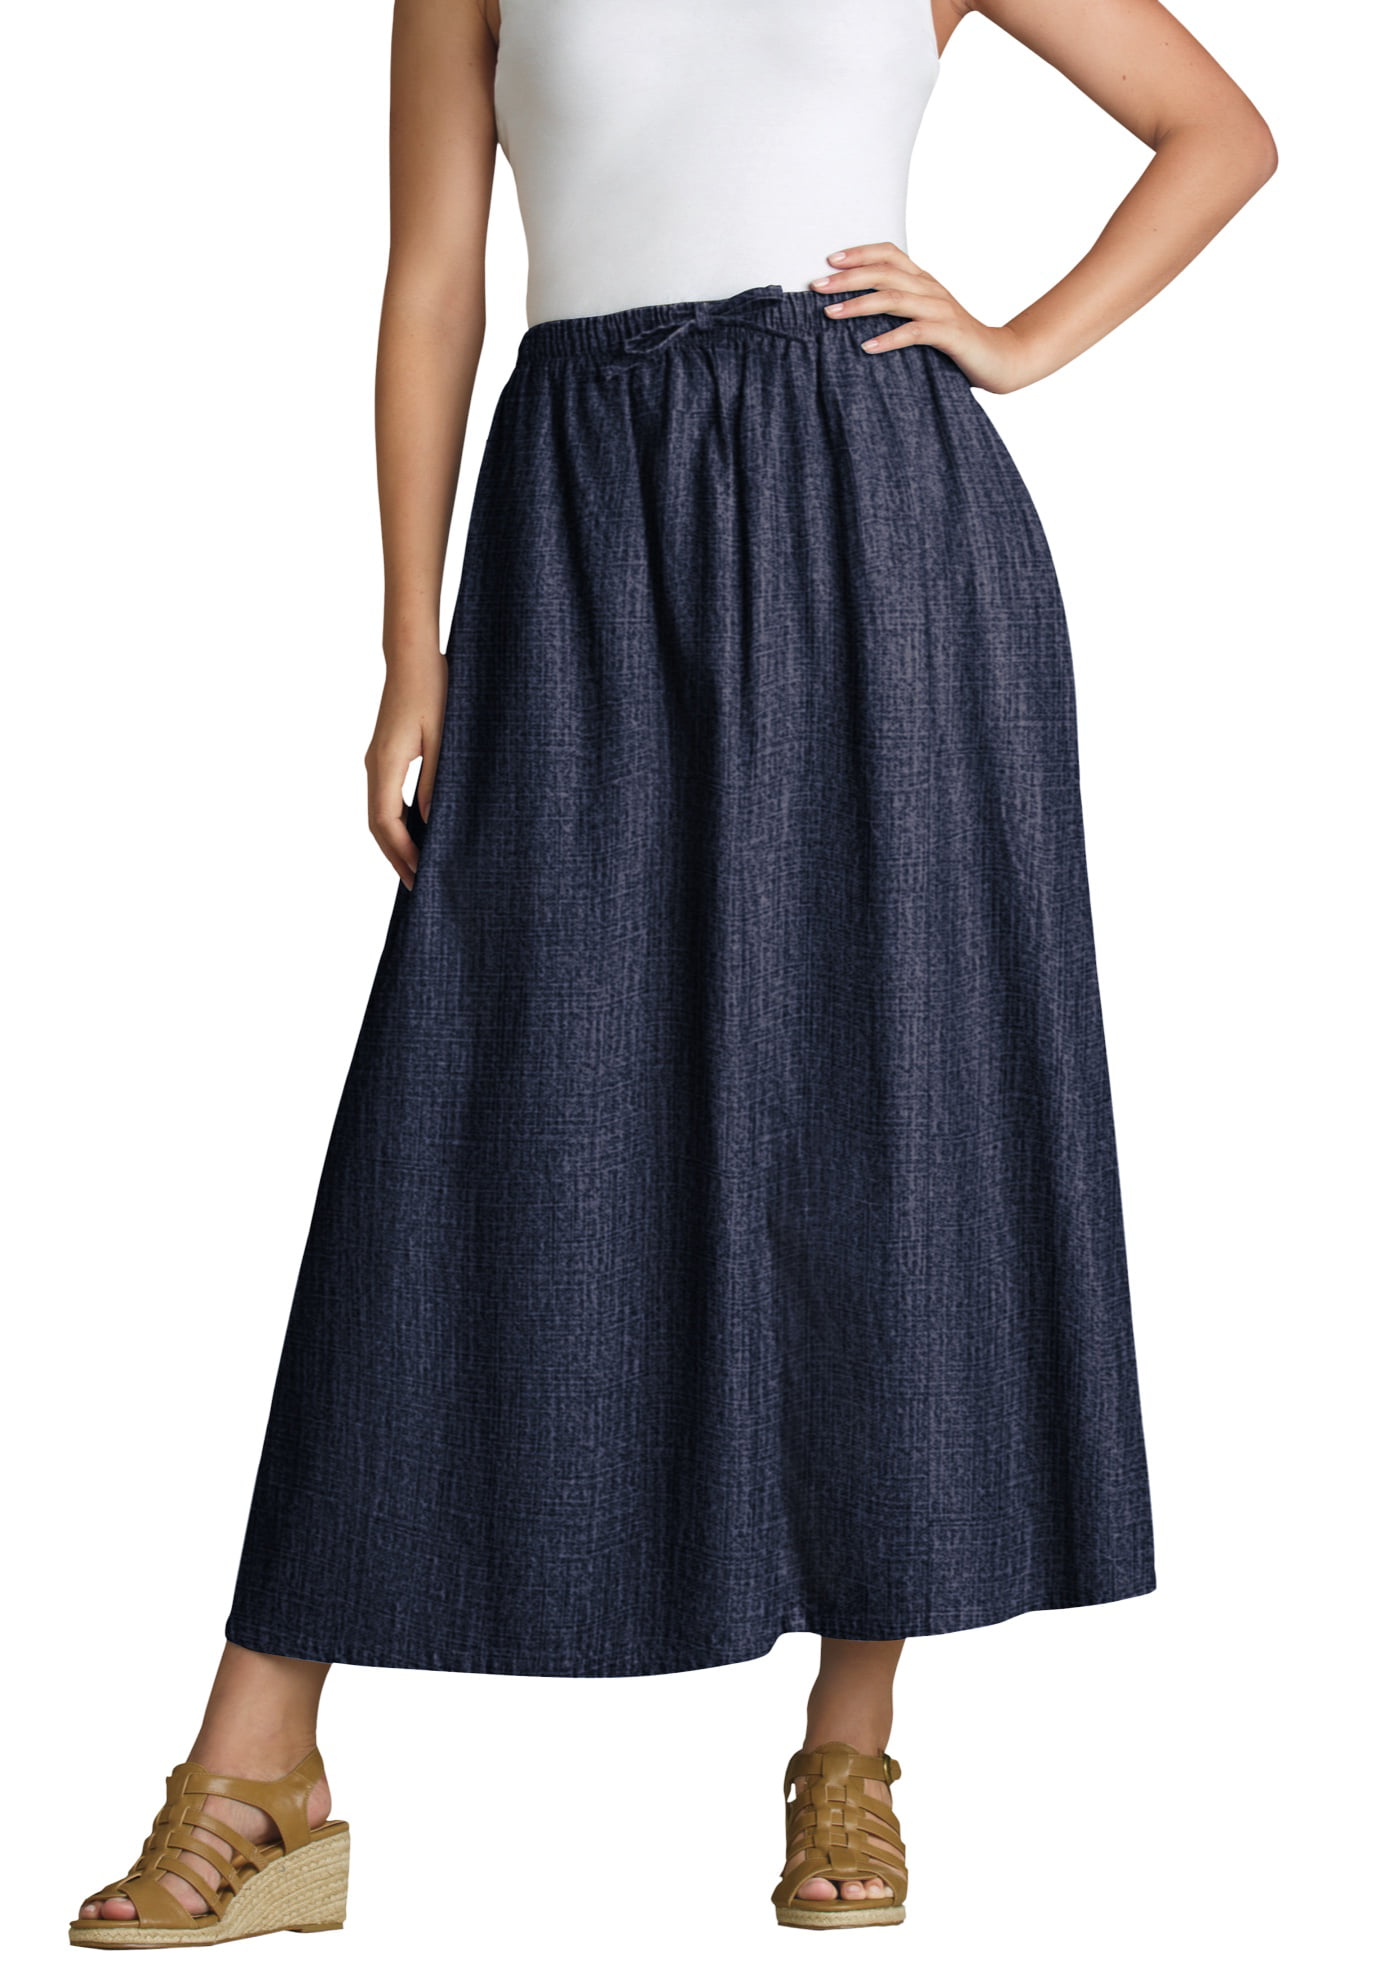 Woman Within - Woman Within Women's Plus Size Flared denim skirt ...